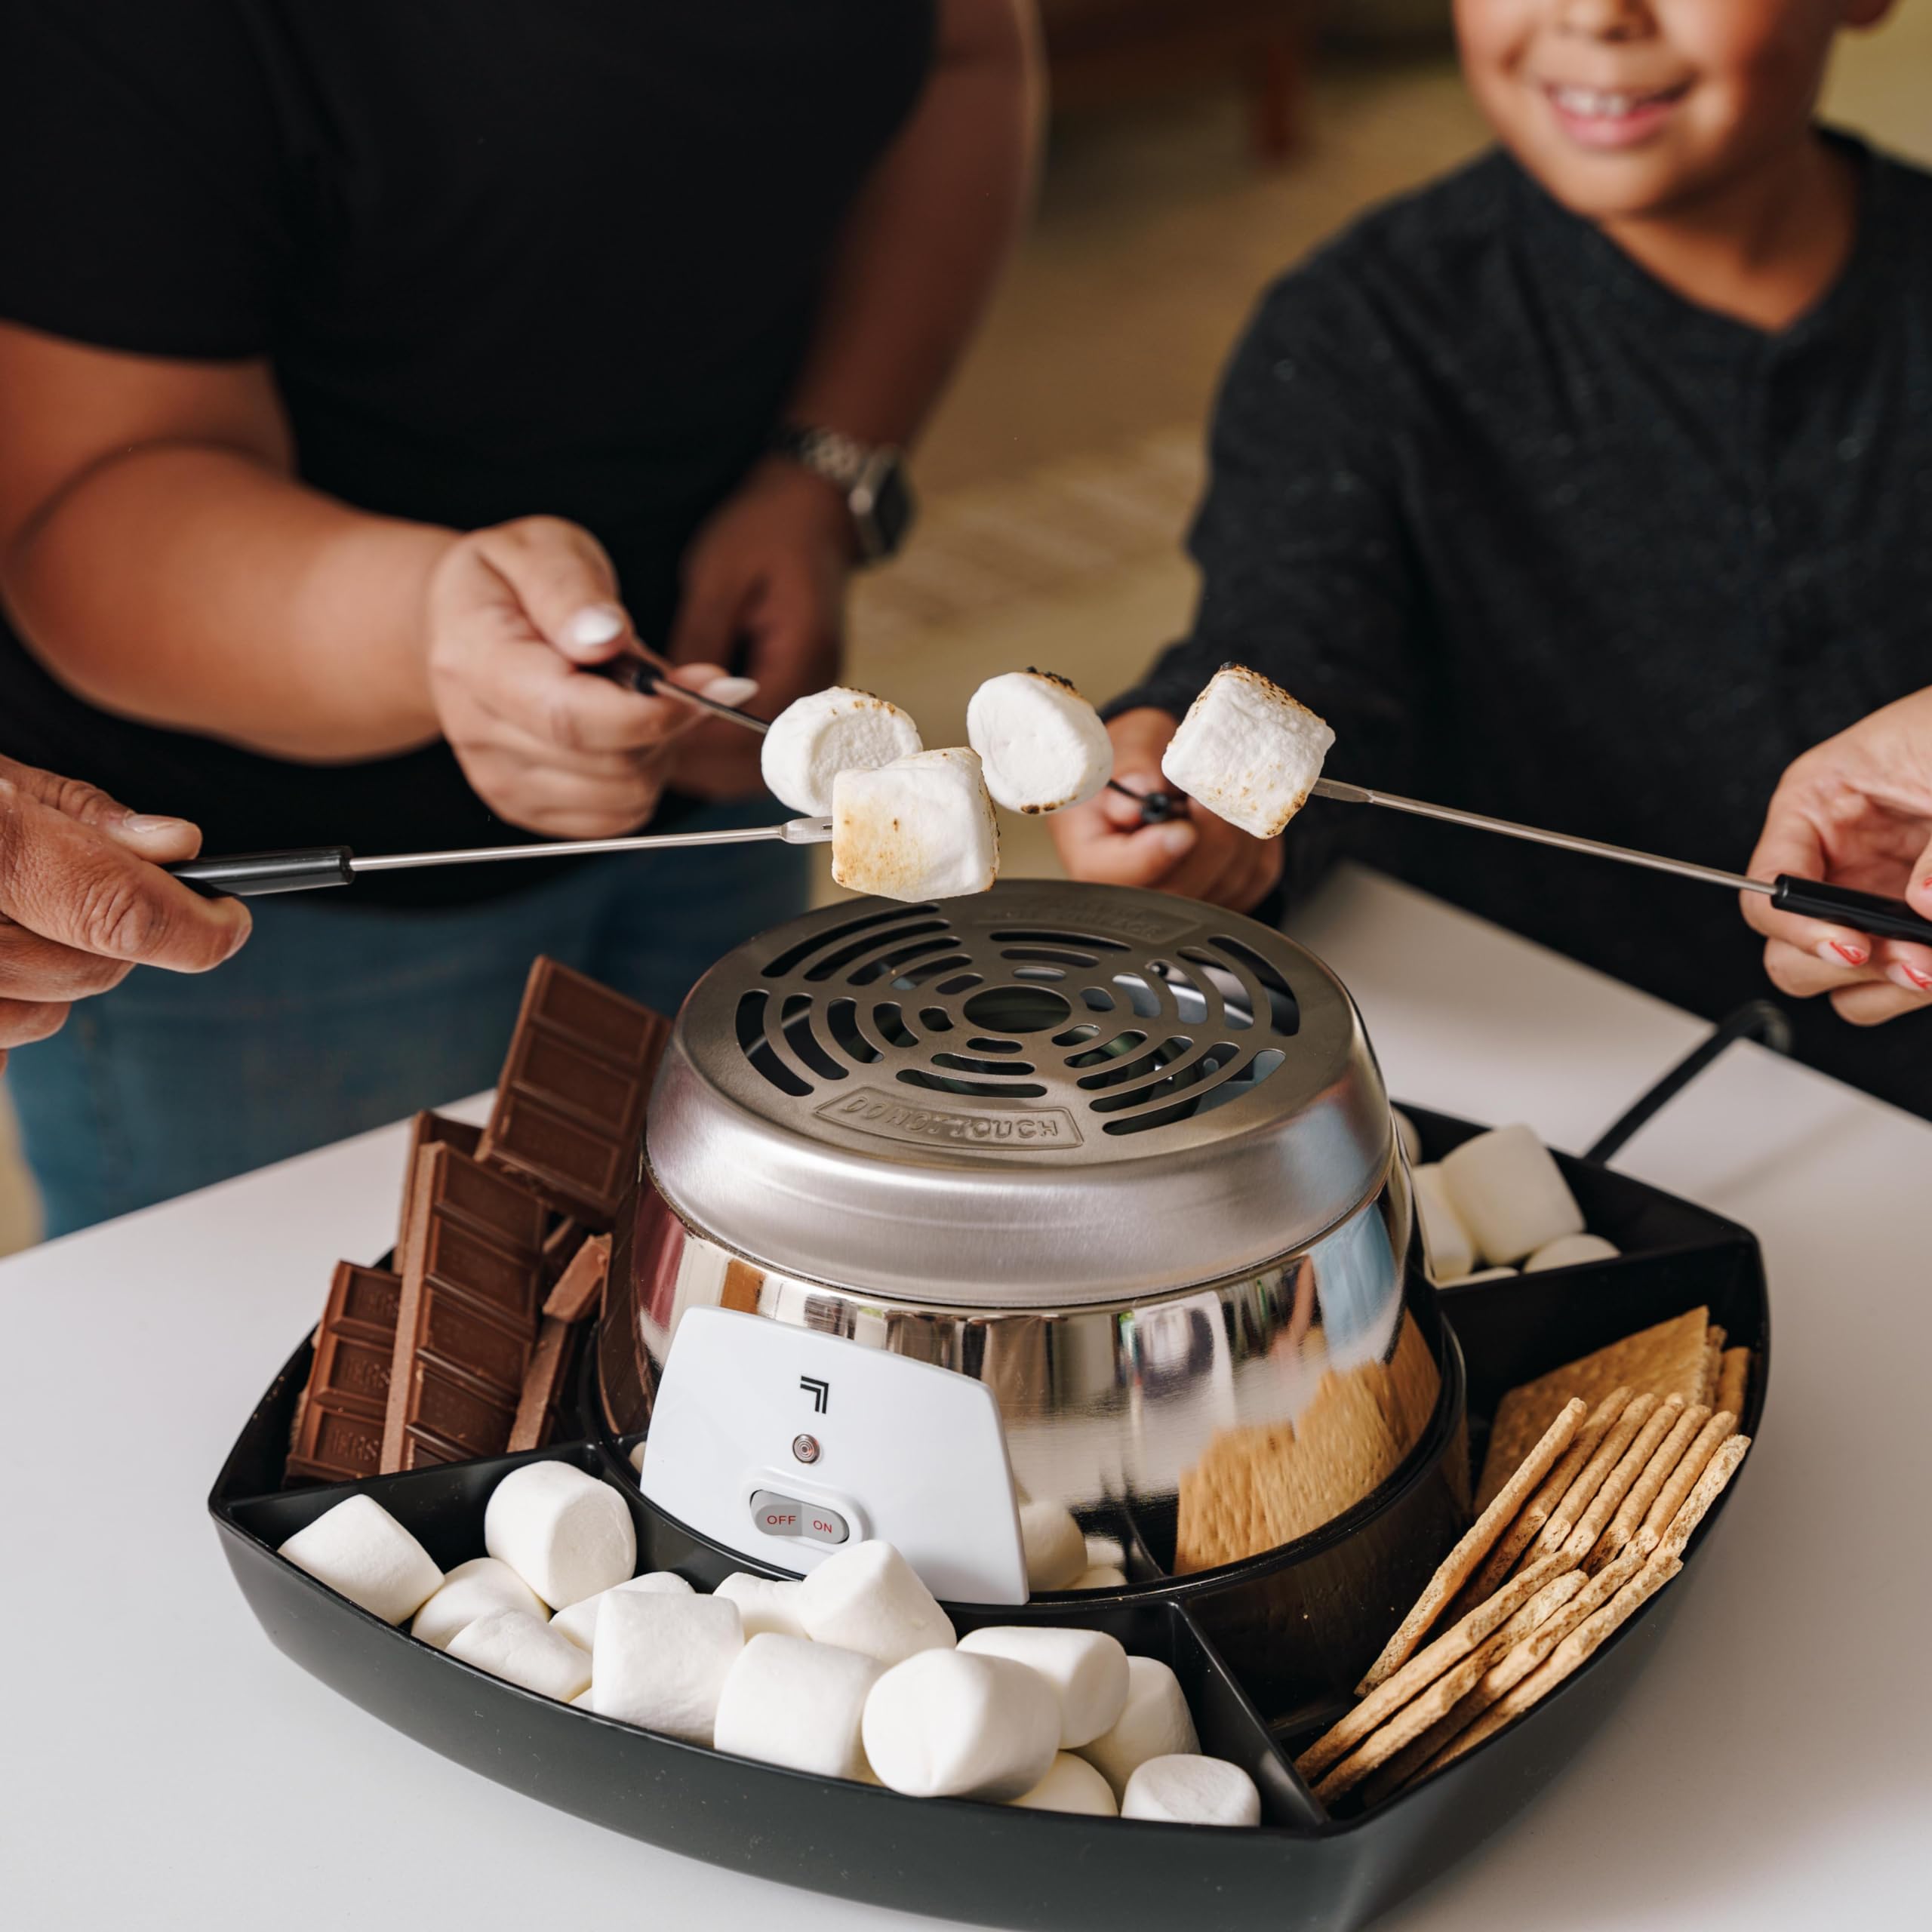 SHARPER IMAGE Electric S'mores Maker [Amazon Exclusive] 8-Piece Kit, 6 Skewers & Serving Tray, Small Kitchen Appliance, Flameless Tabletop Marshmallow Roaster, Date Night Fun Kids Family Activity